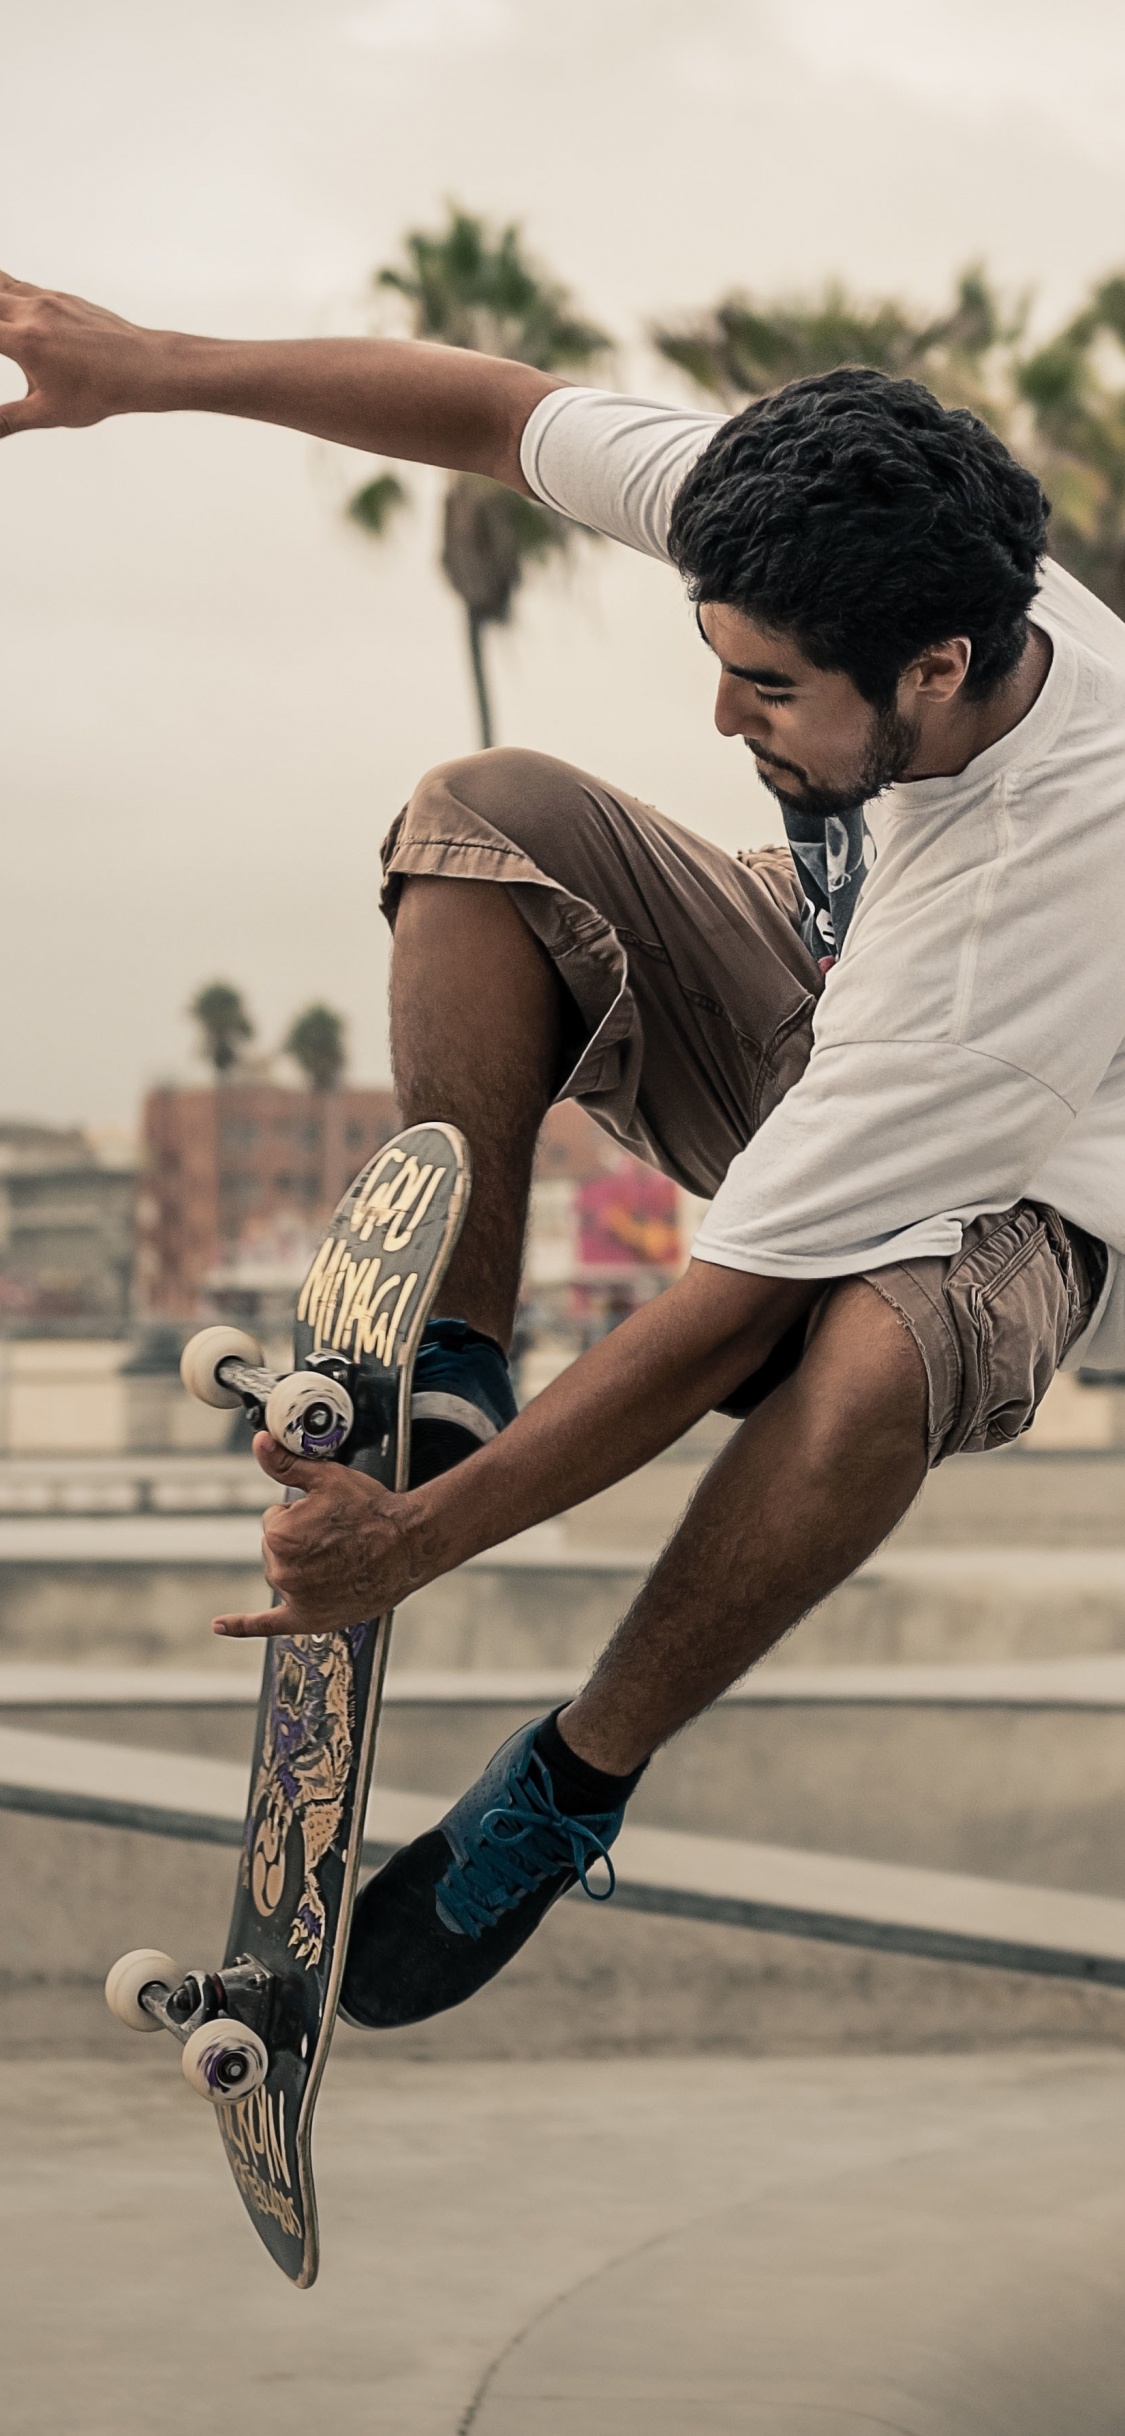 Man in White T-shirt and Brown Shorts Playing Skateboard During Daytime. Wallpaper in 1125x2436 Resolution